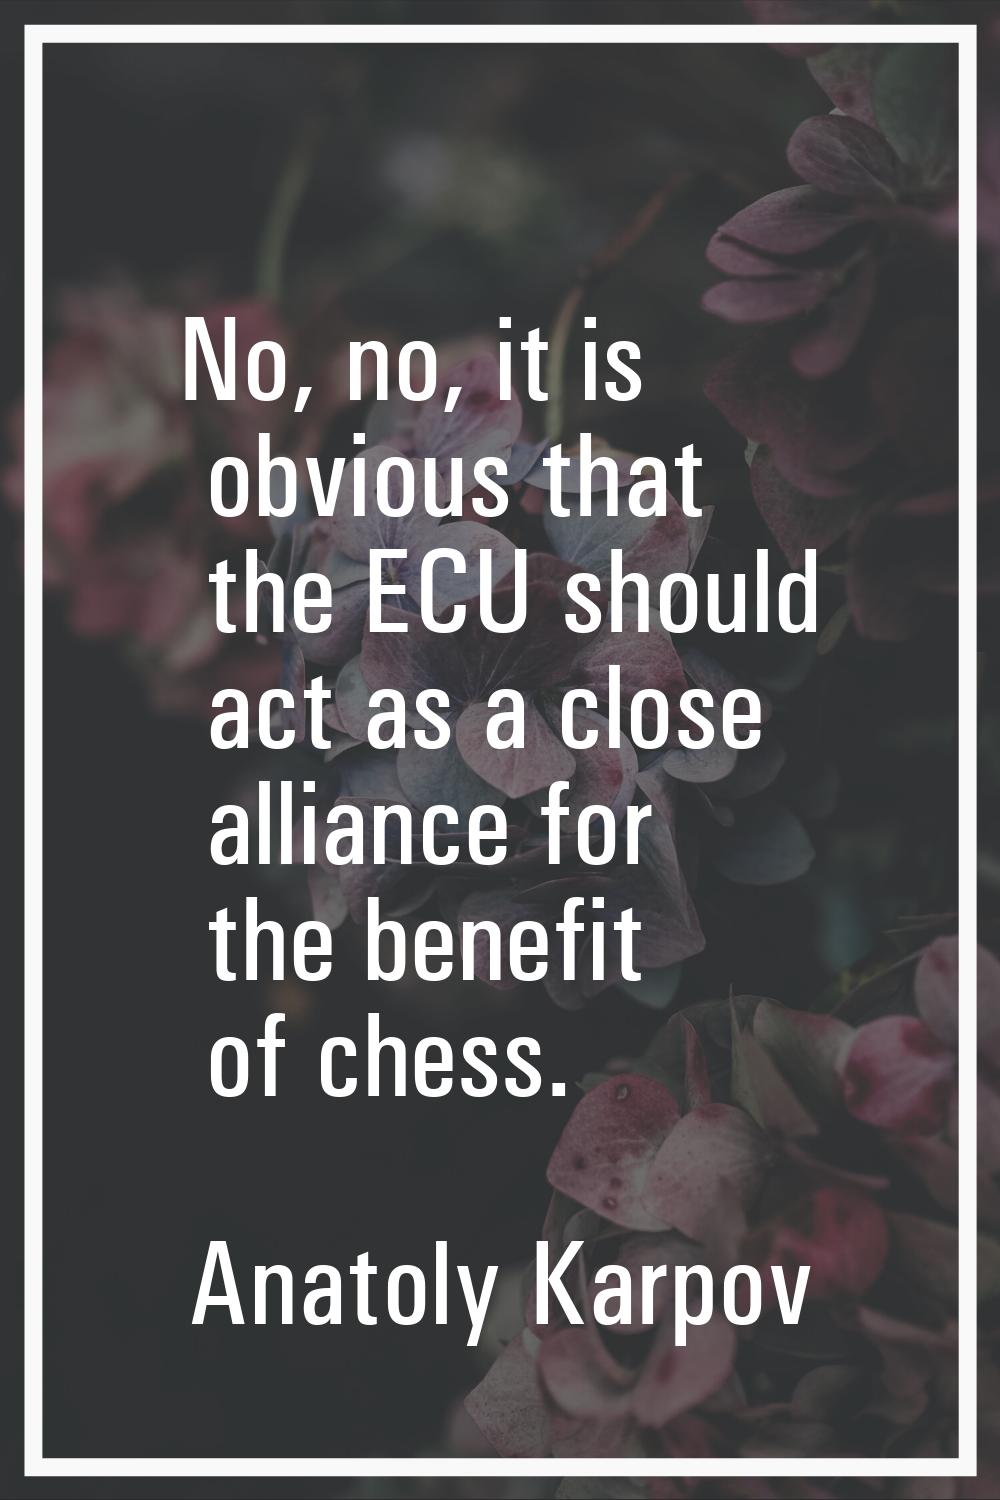 No, no, it is obvious that the ECU should act as a close alliance for the benefit of chess.